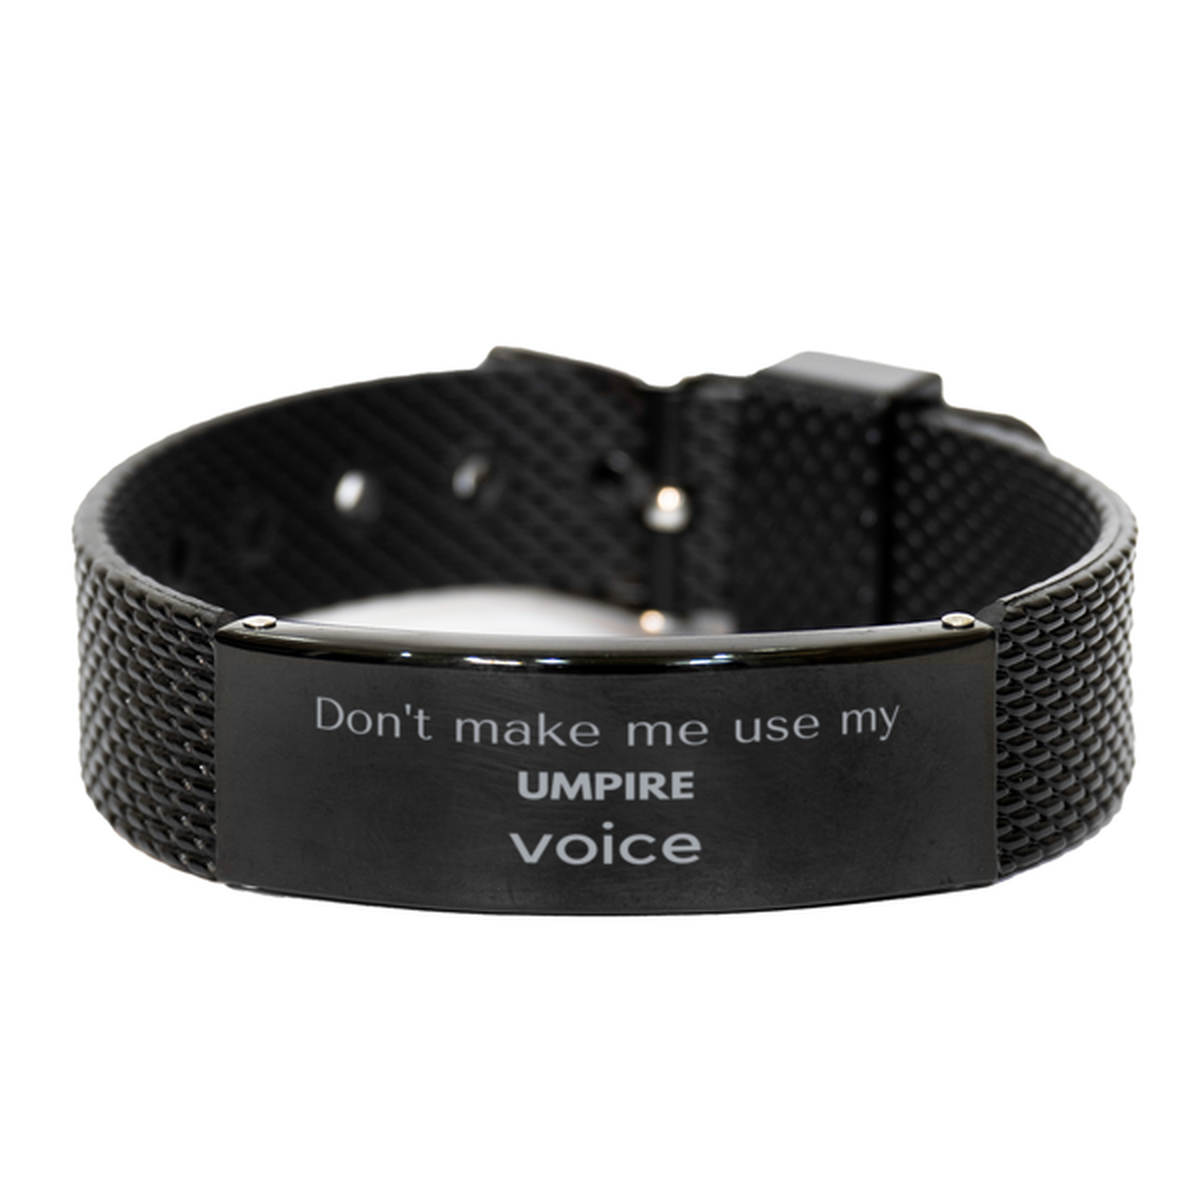 Don't make me use my Umpire voice, Sarcasm Umpire Gifts, Christmas Umpire Black Shark Mesh Bracelet Birthday Unique Gifts For Umpire Coworkers, Men, Women, Colleague, Friends